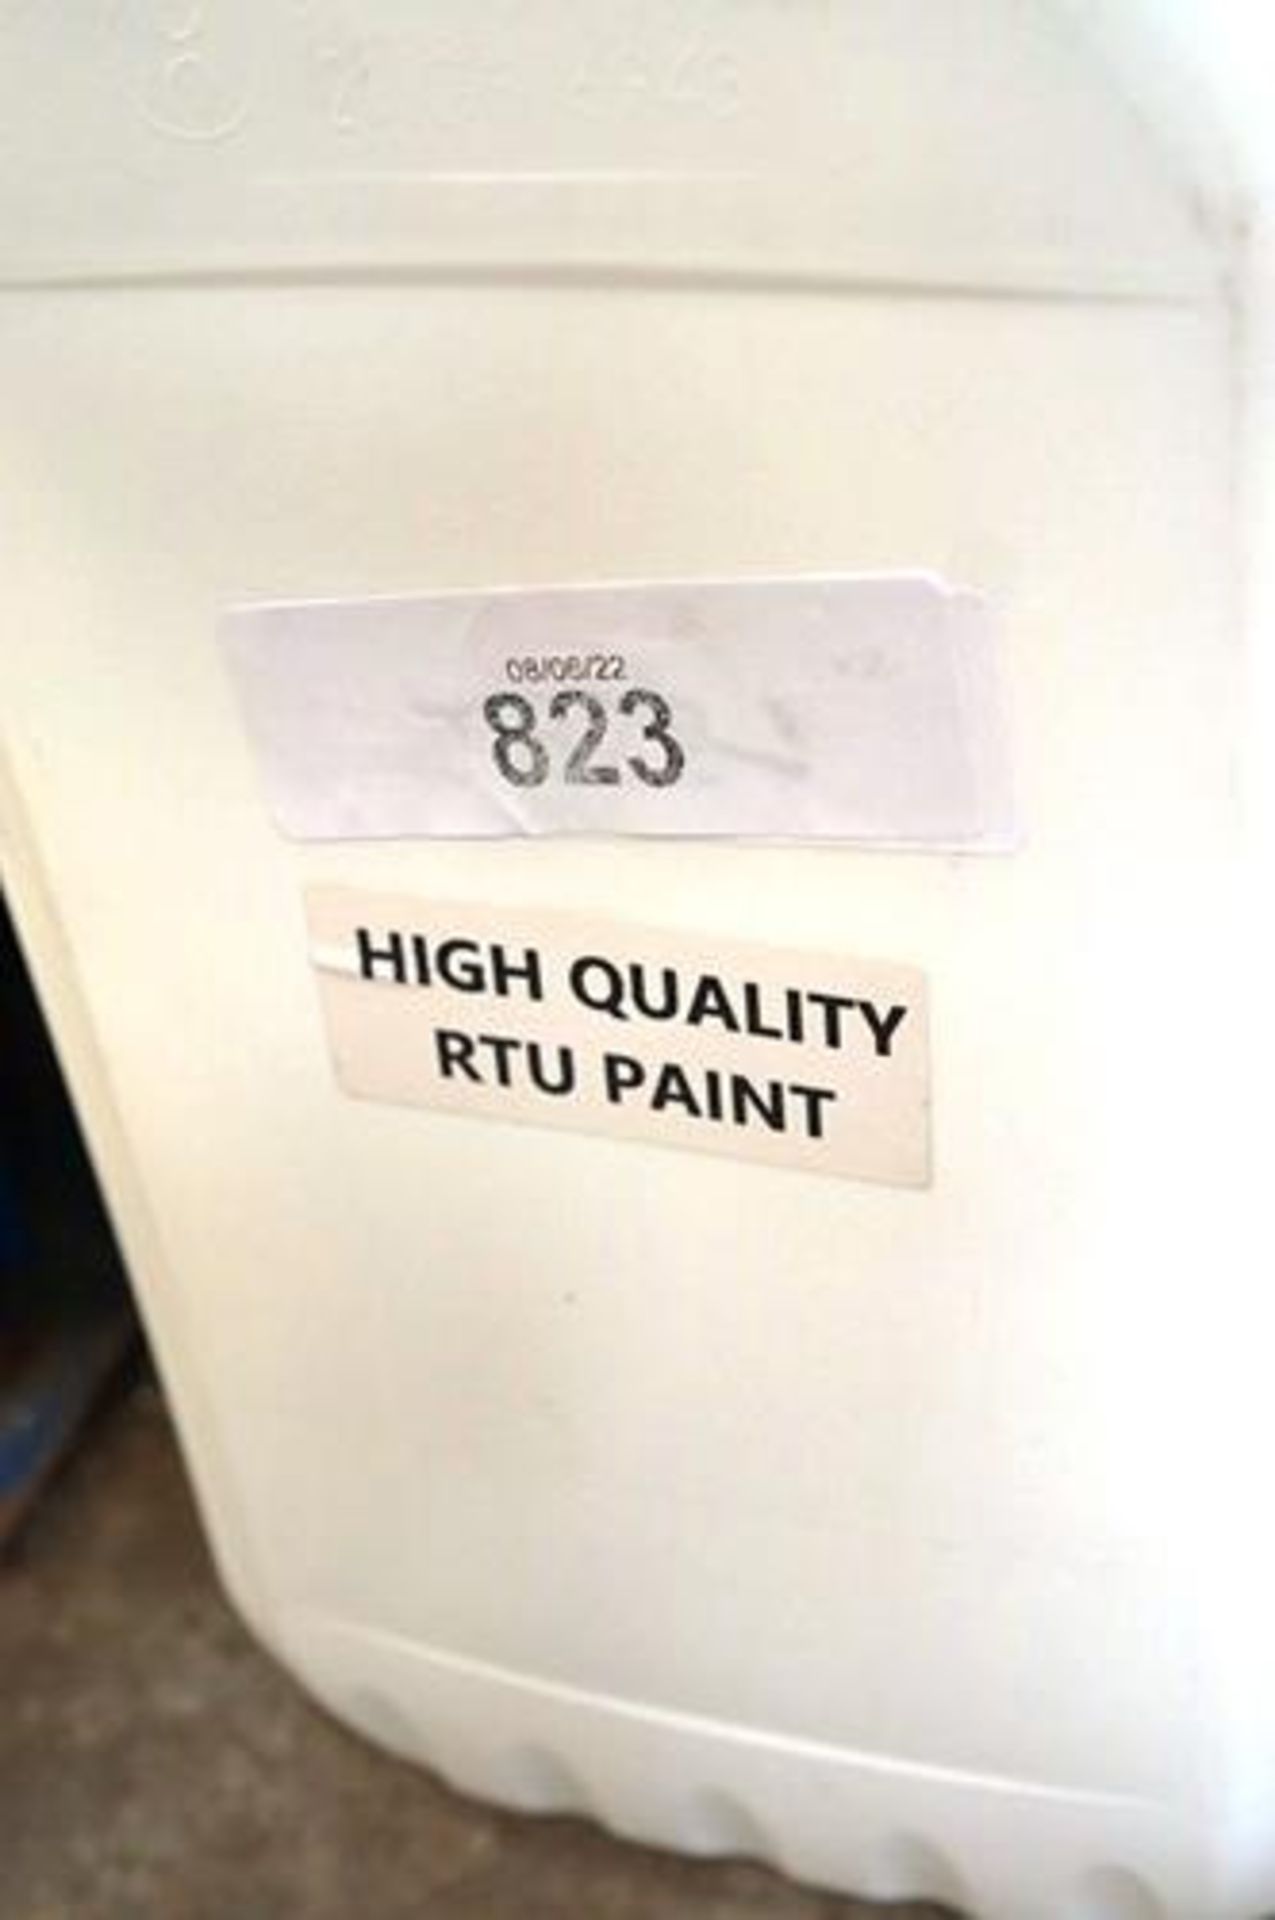 2 x 10ltr assorted RTU paint comprising 1 x Stadium quality and 1 x High quality. -new- (GS36) - Image 2 of 2